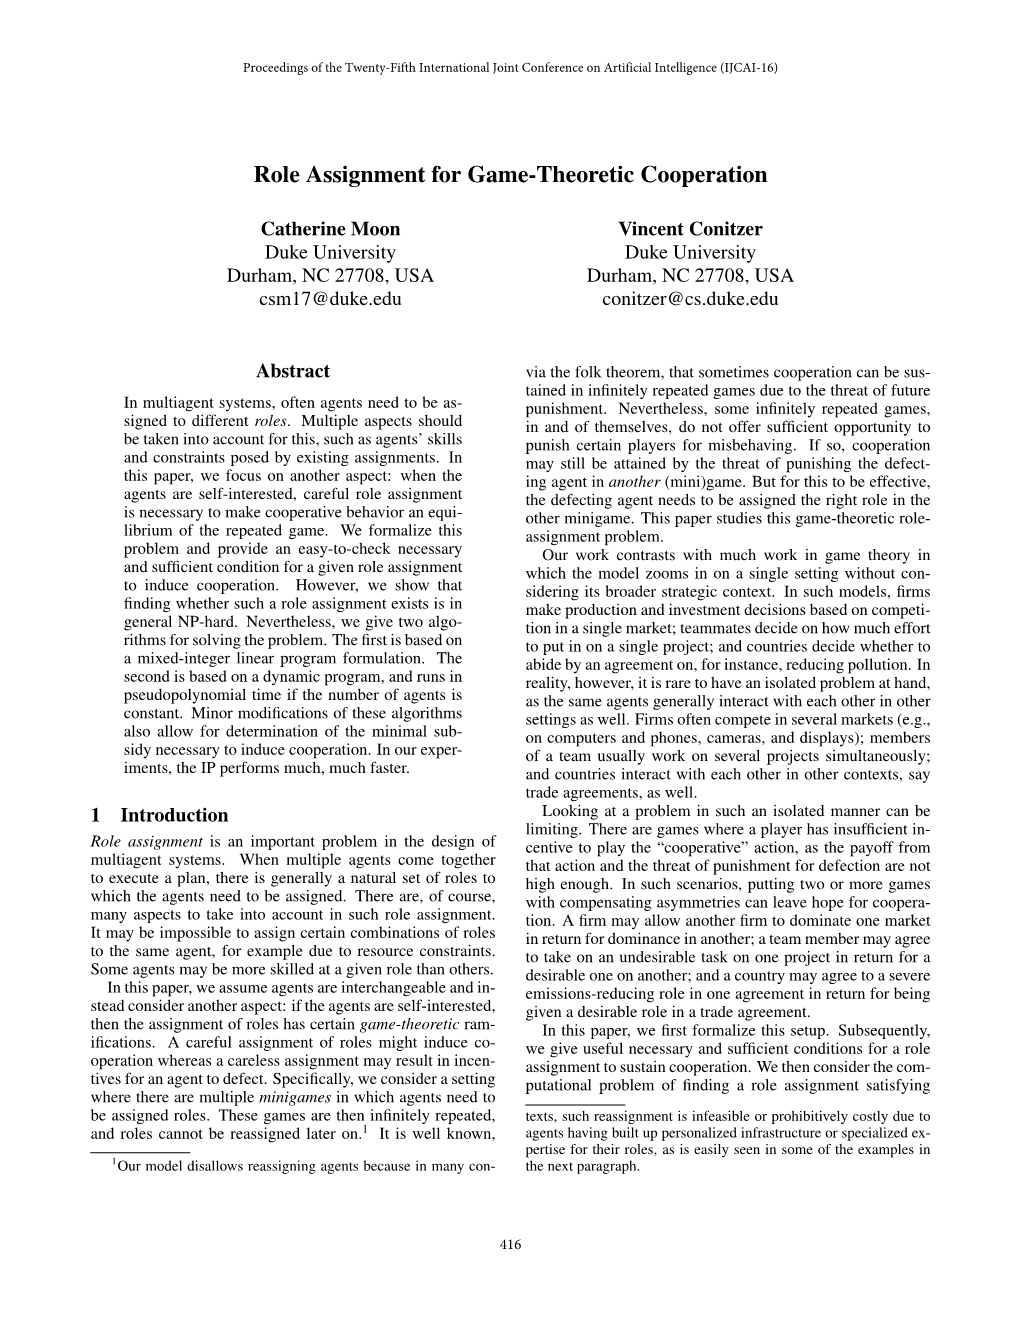 Role Assignment for Game-Theoretic Cooperation